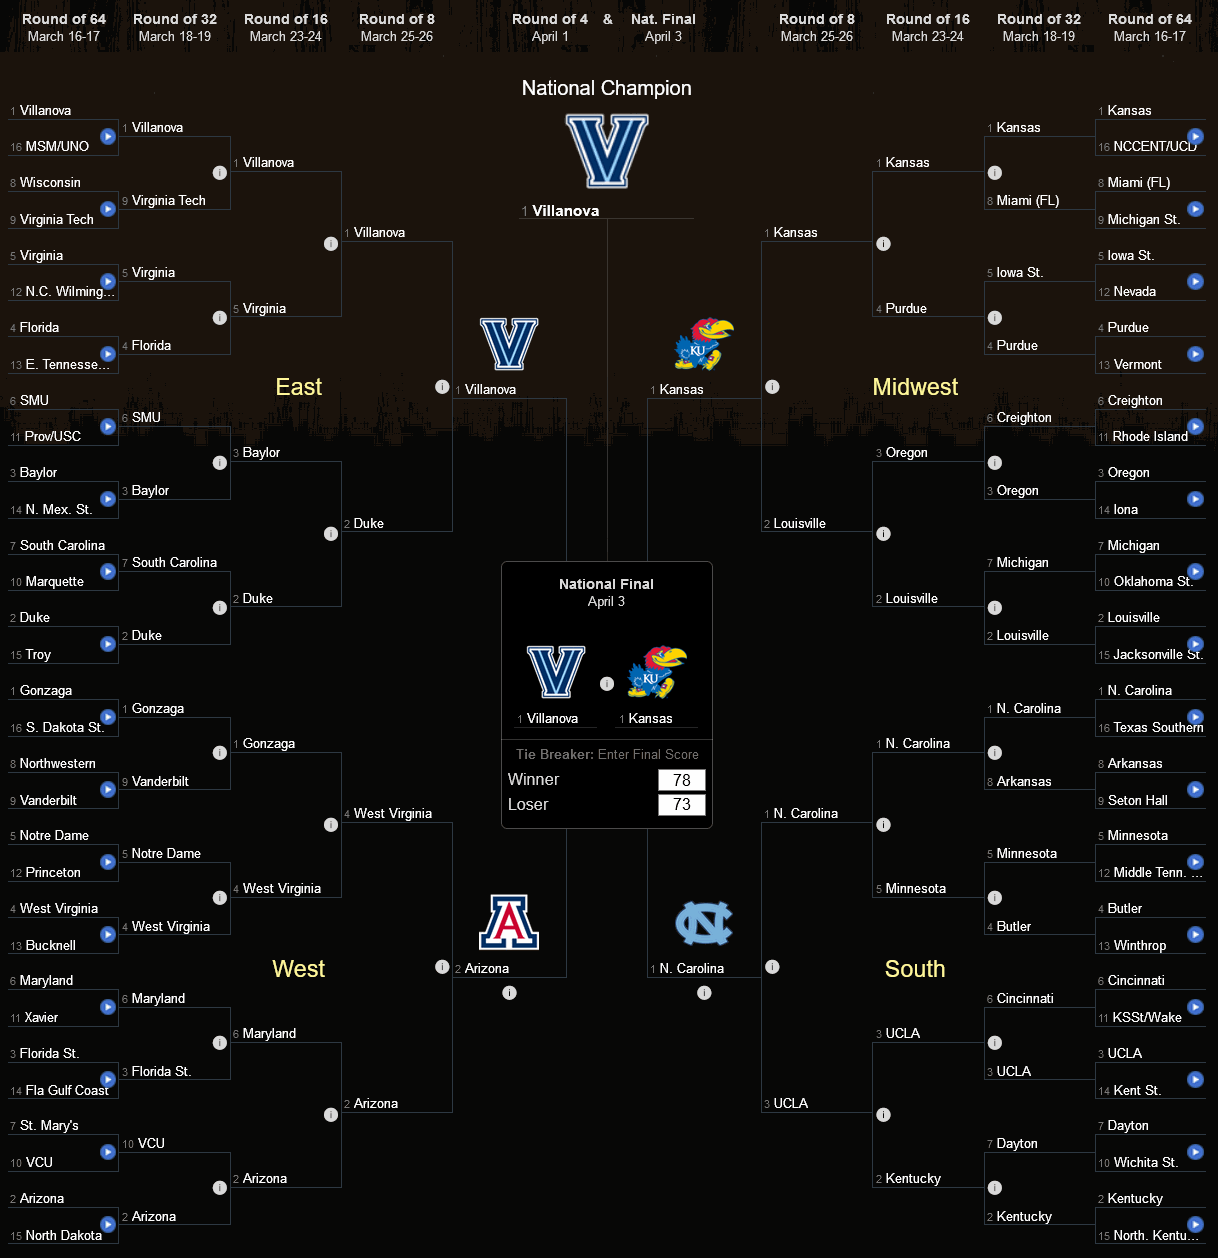 NCAA bracket where I bet on most favorite teams to make it to the Final Four: 3 of the 4 #1 seeds.